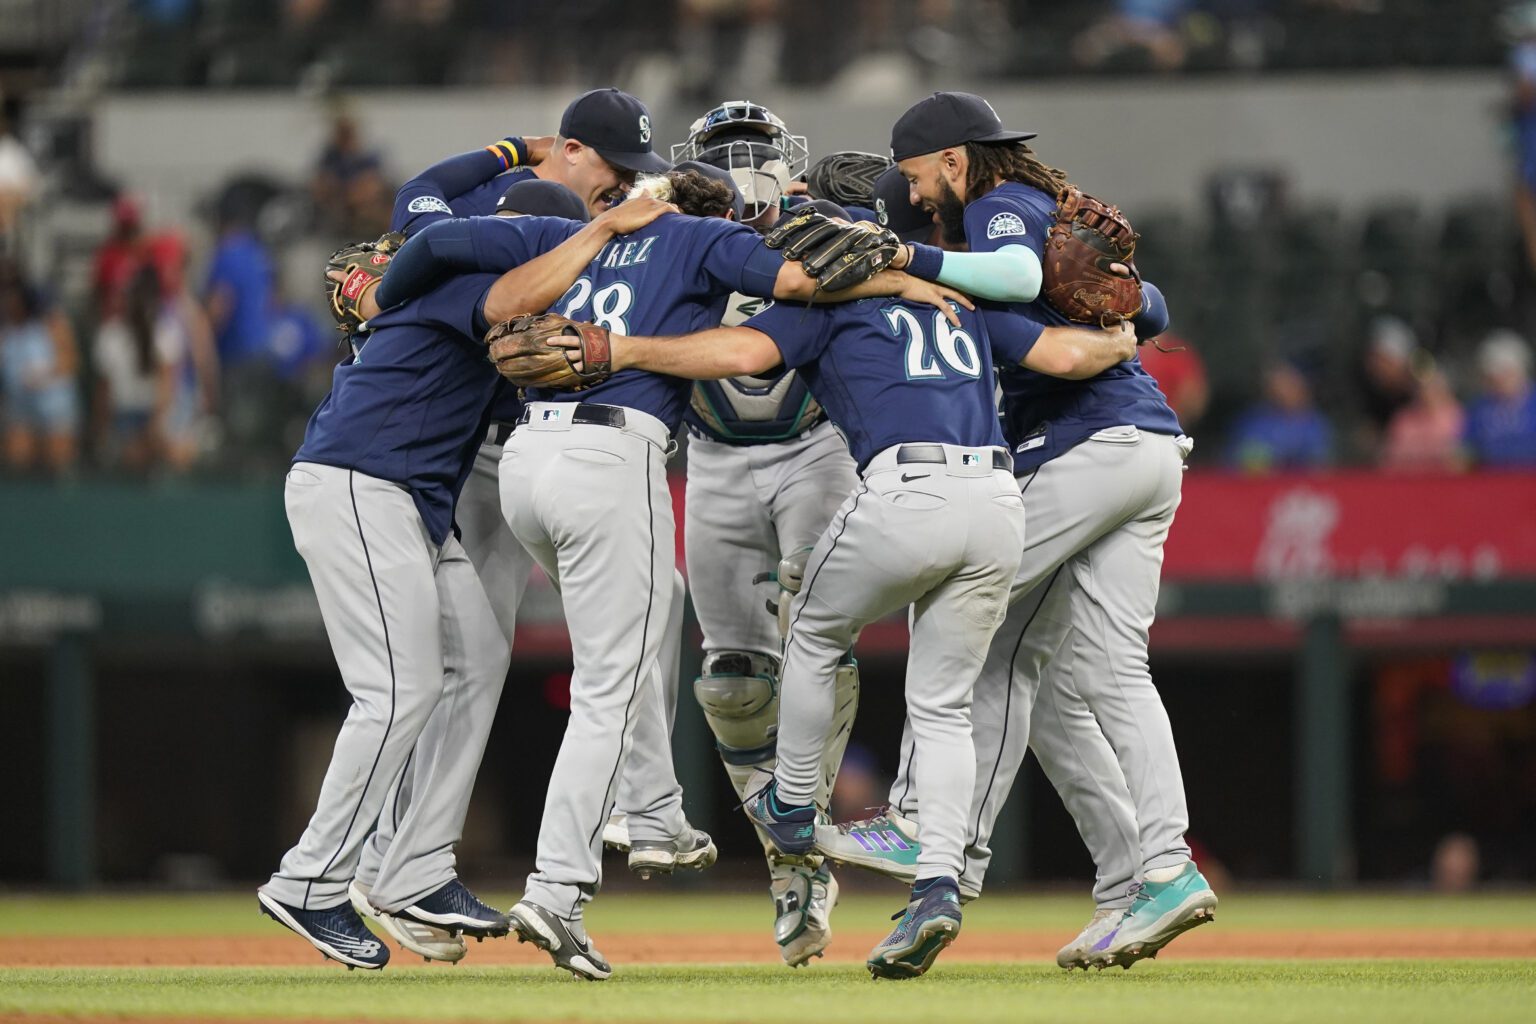 The Seattle Mariners dance in a circle after the final out of the baseball game against the Texas Rangers in Arlington